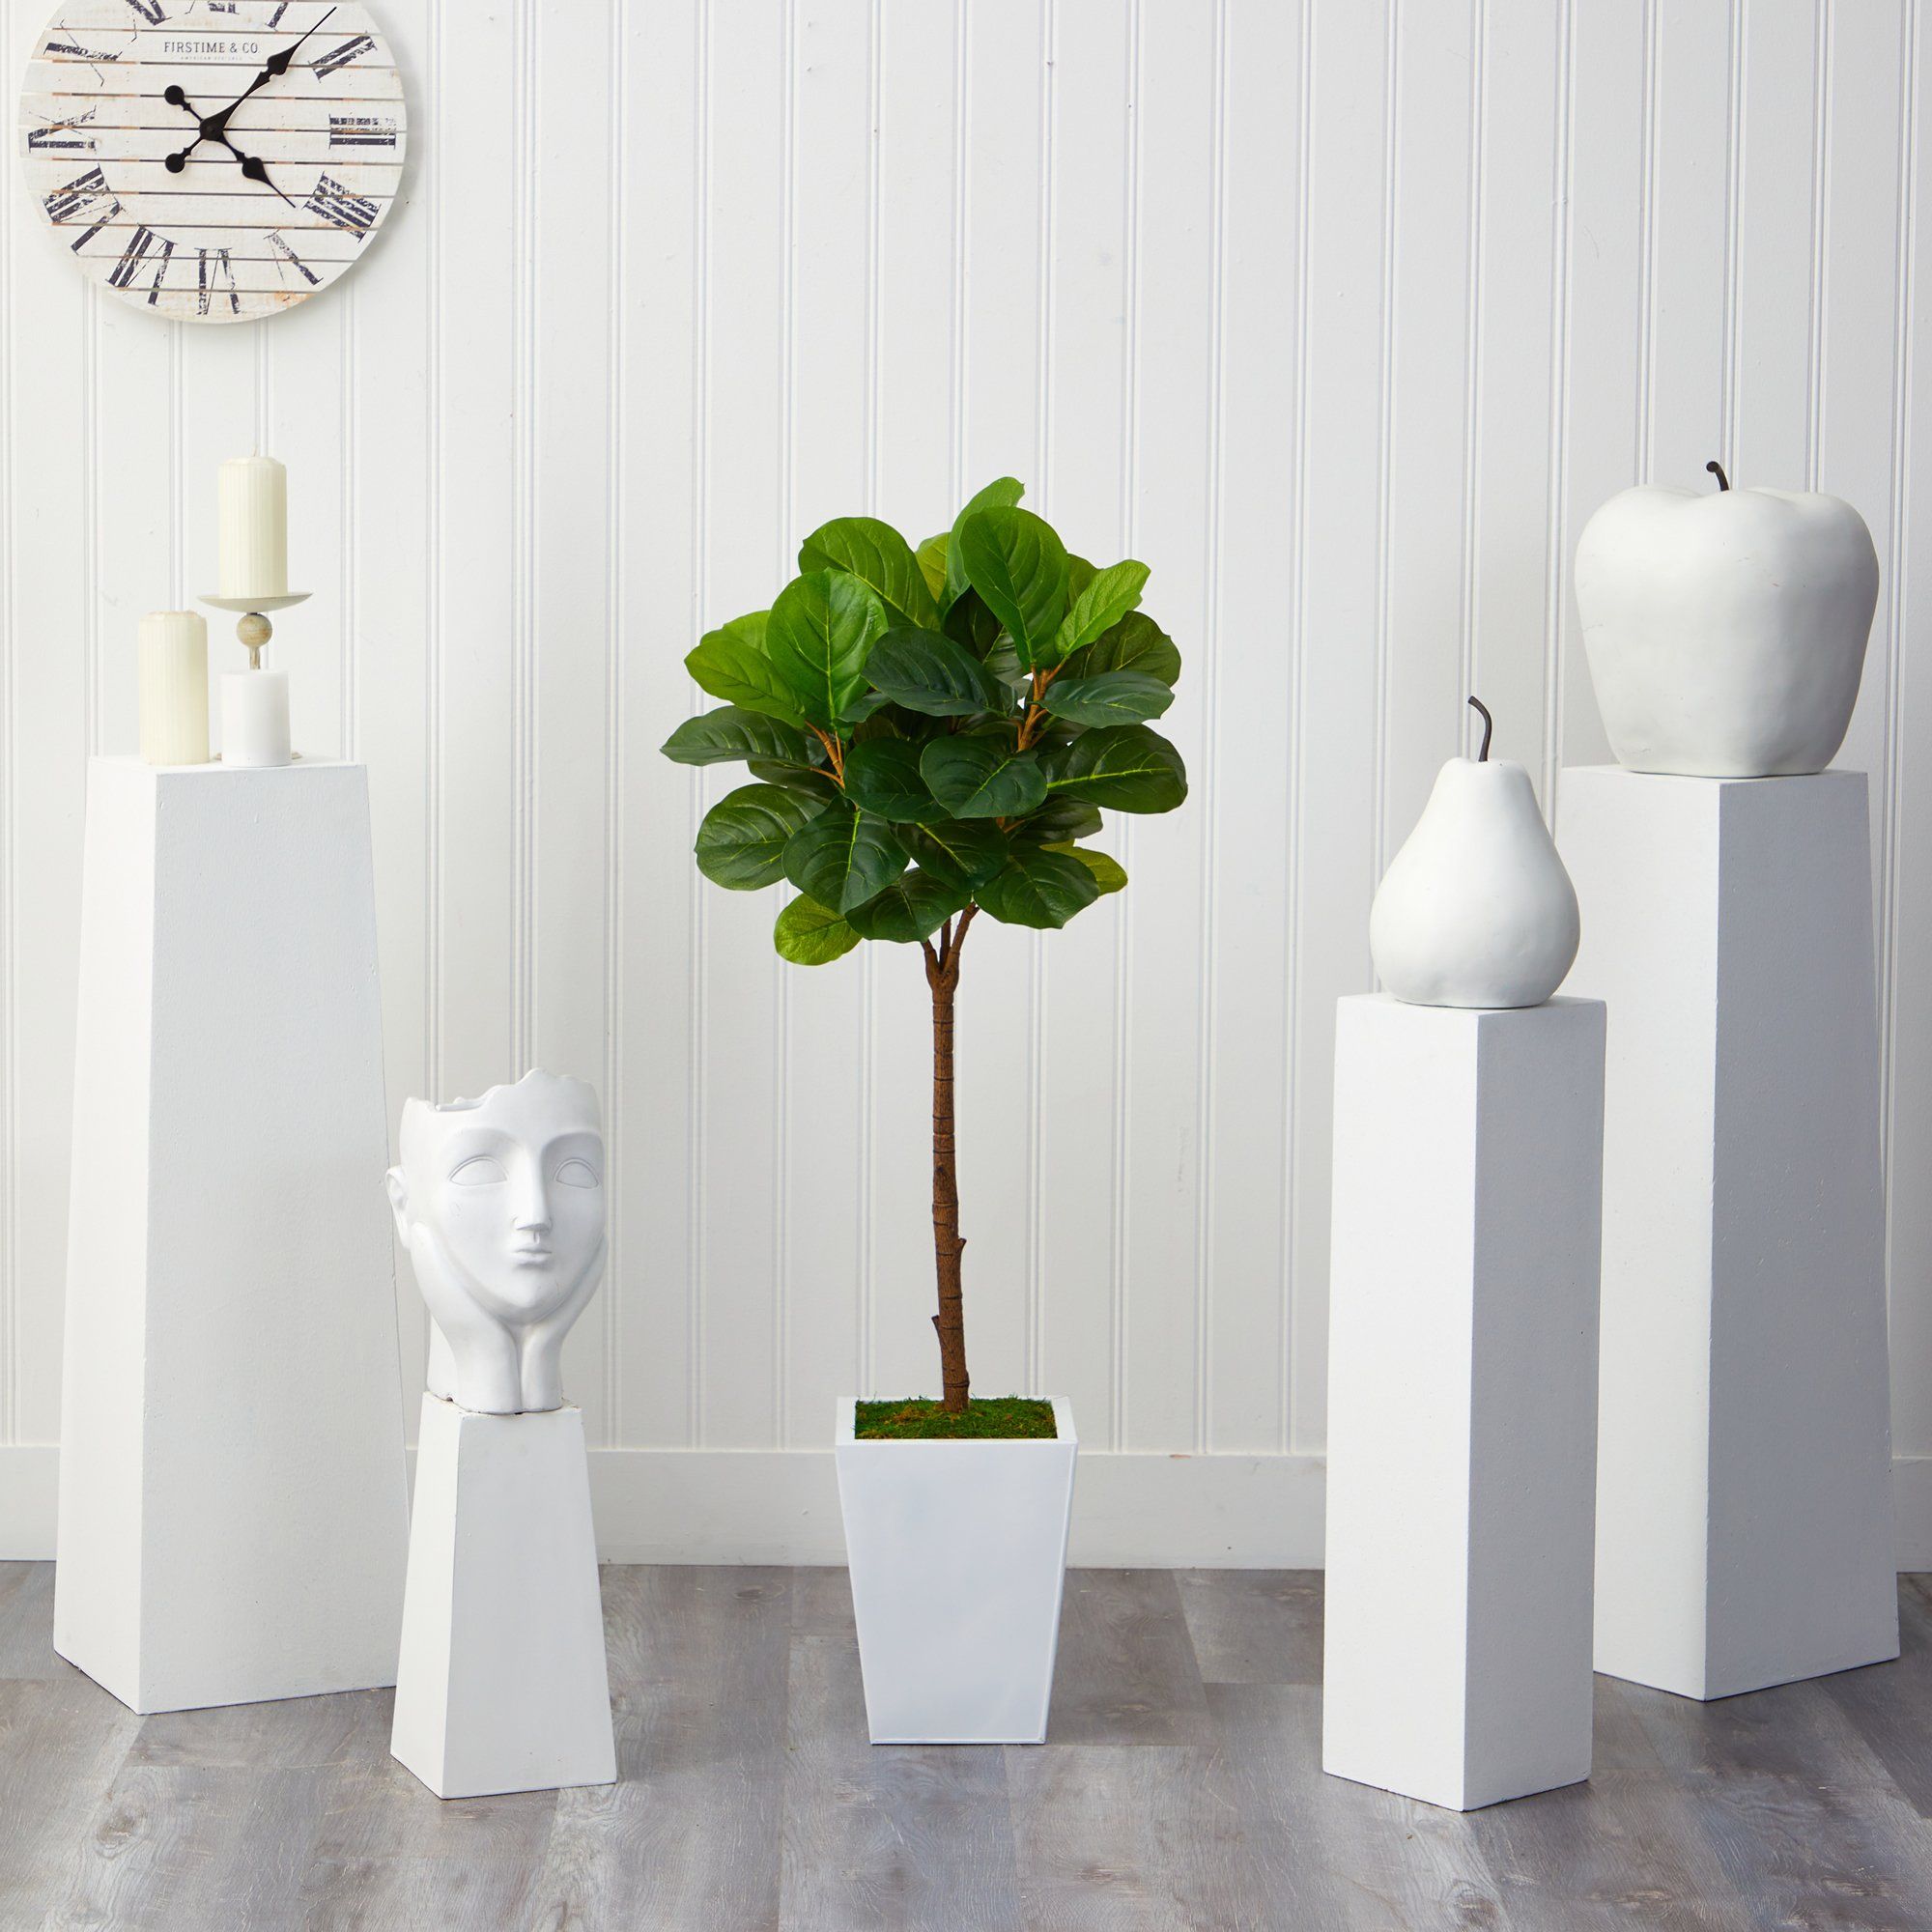 4’ Fiddle Leaf Tree in White Metal Planter (Real Touch)